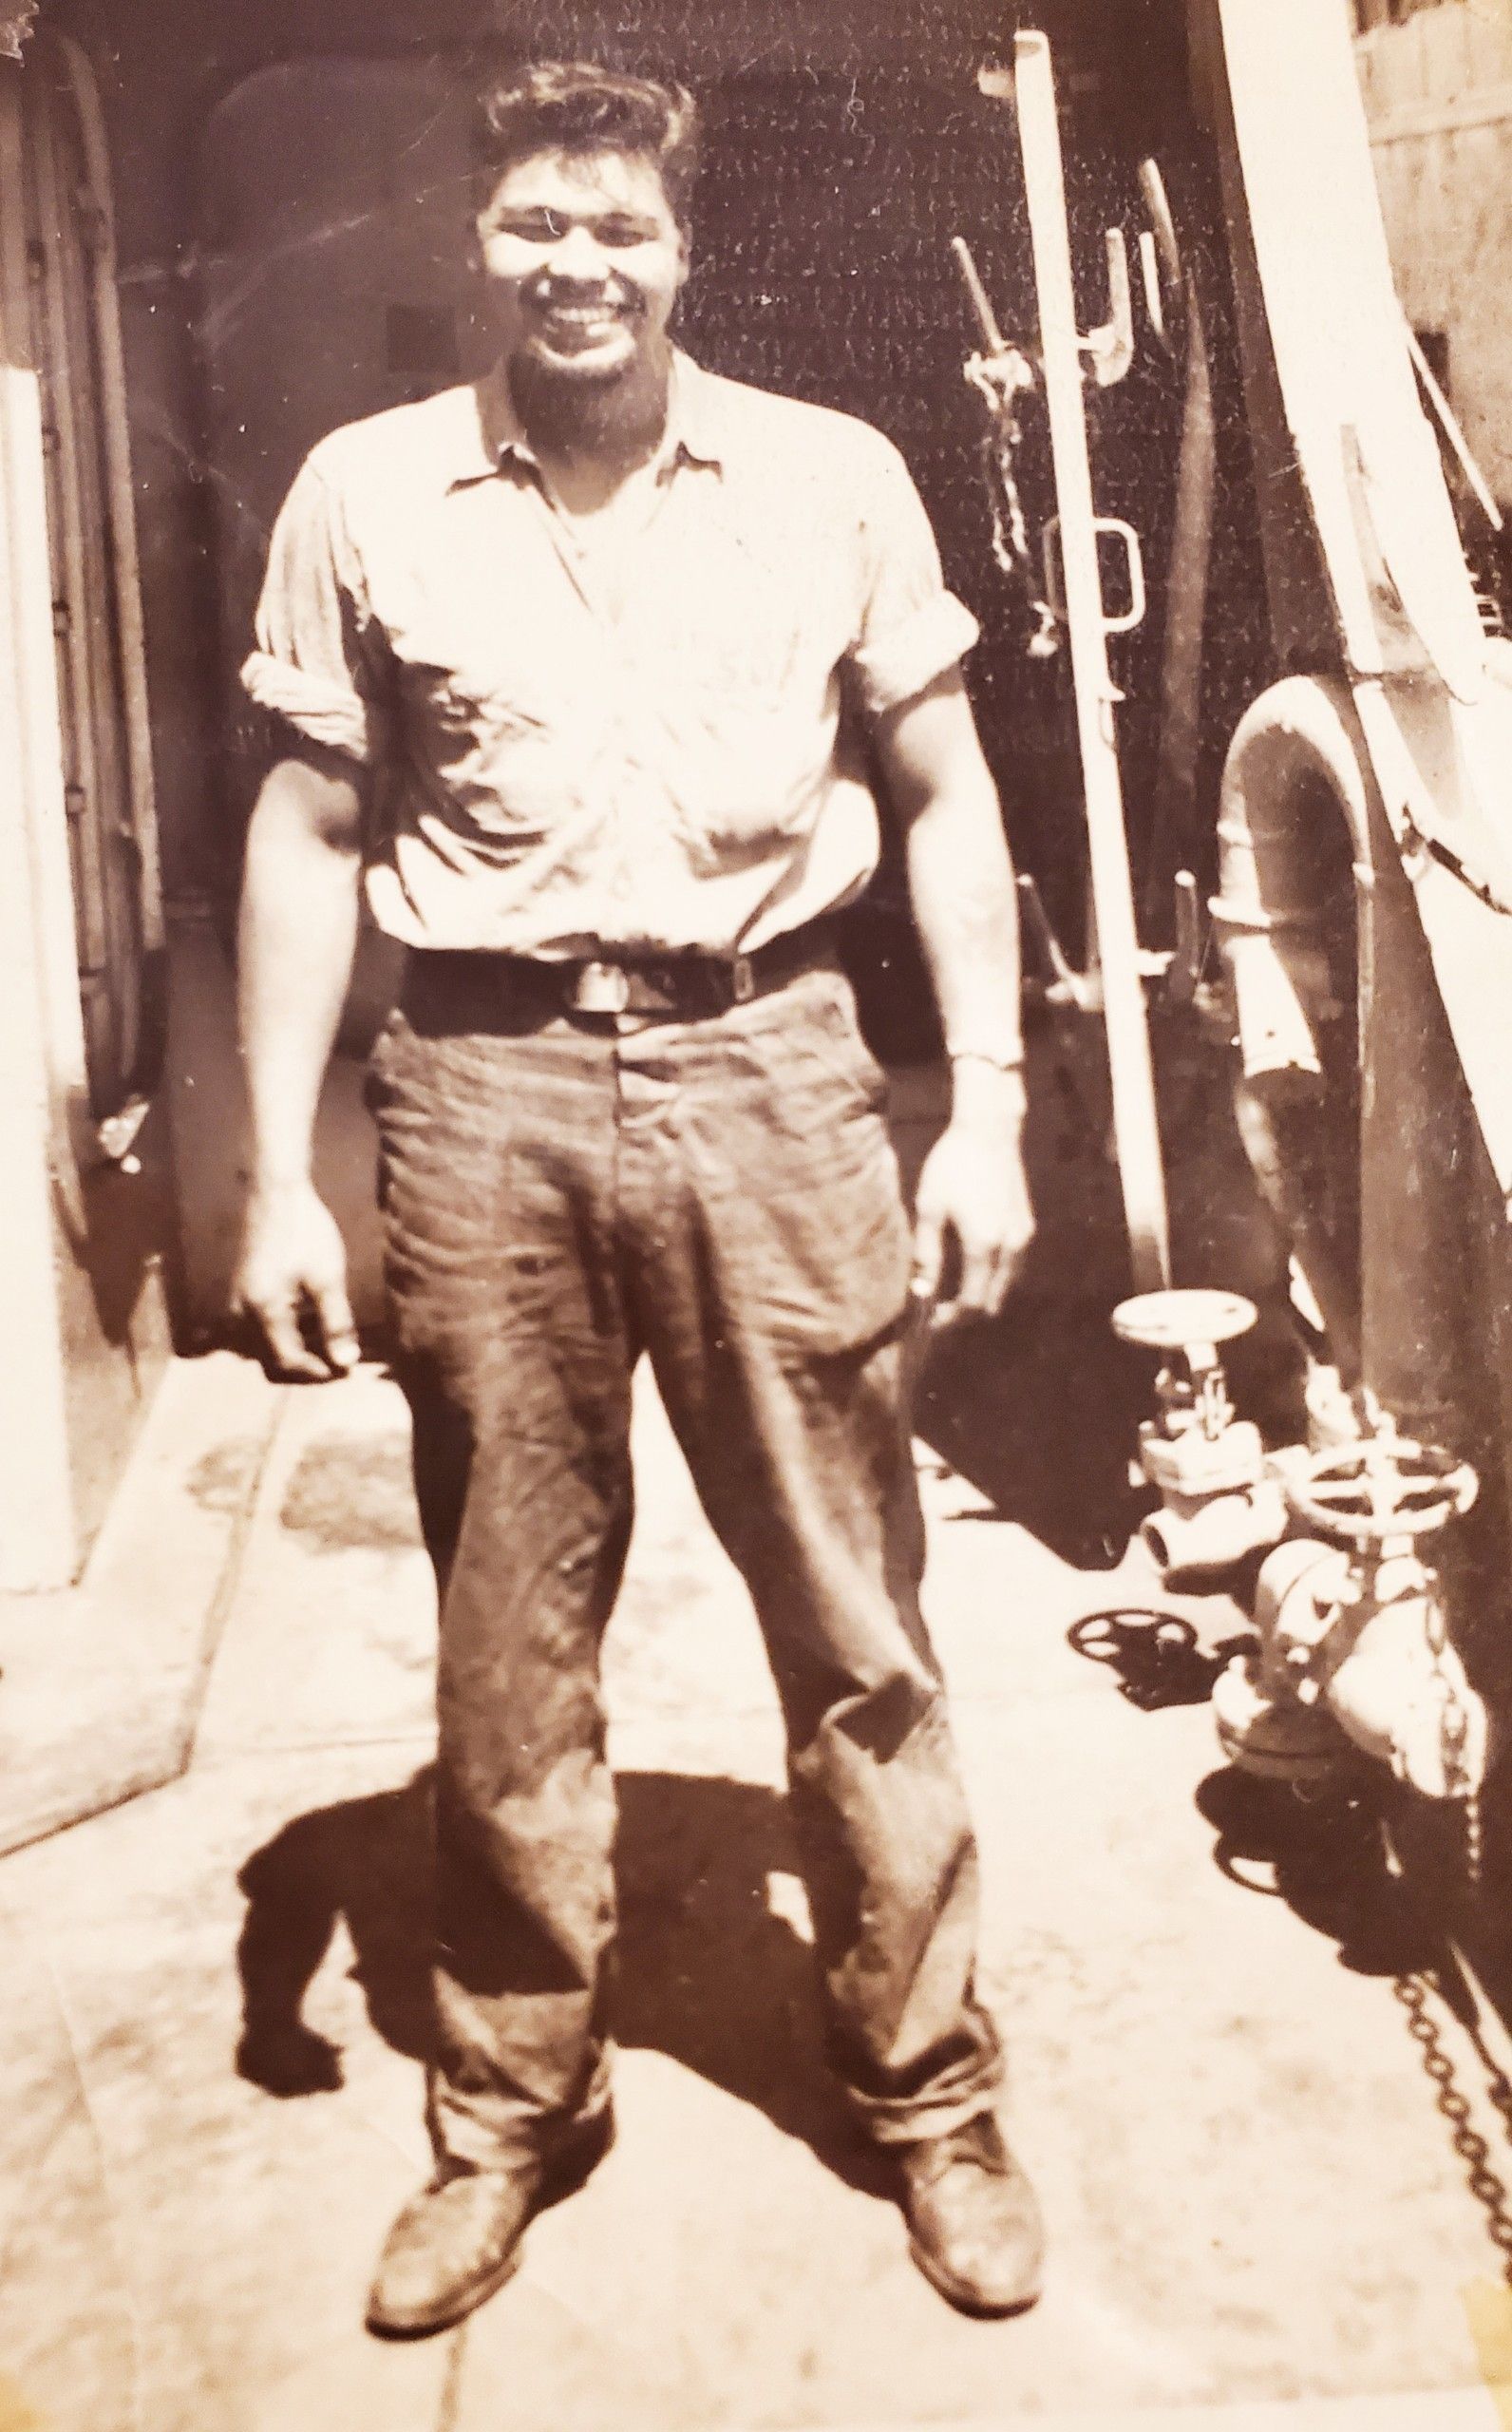 UNKNOWN LOCATION (Est. 1952) Engineman Seaman Solomon Atkinson smiles for a picture. Atkinson would go on to become one of the first U.S. Navy SEALs, complete 22 years of active Naval service and retire in 1973 as Chief Warrant Officer 4. (Photo courtesy of U.S. Navy)